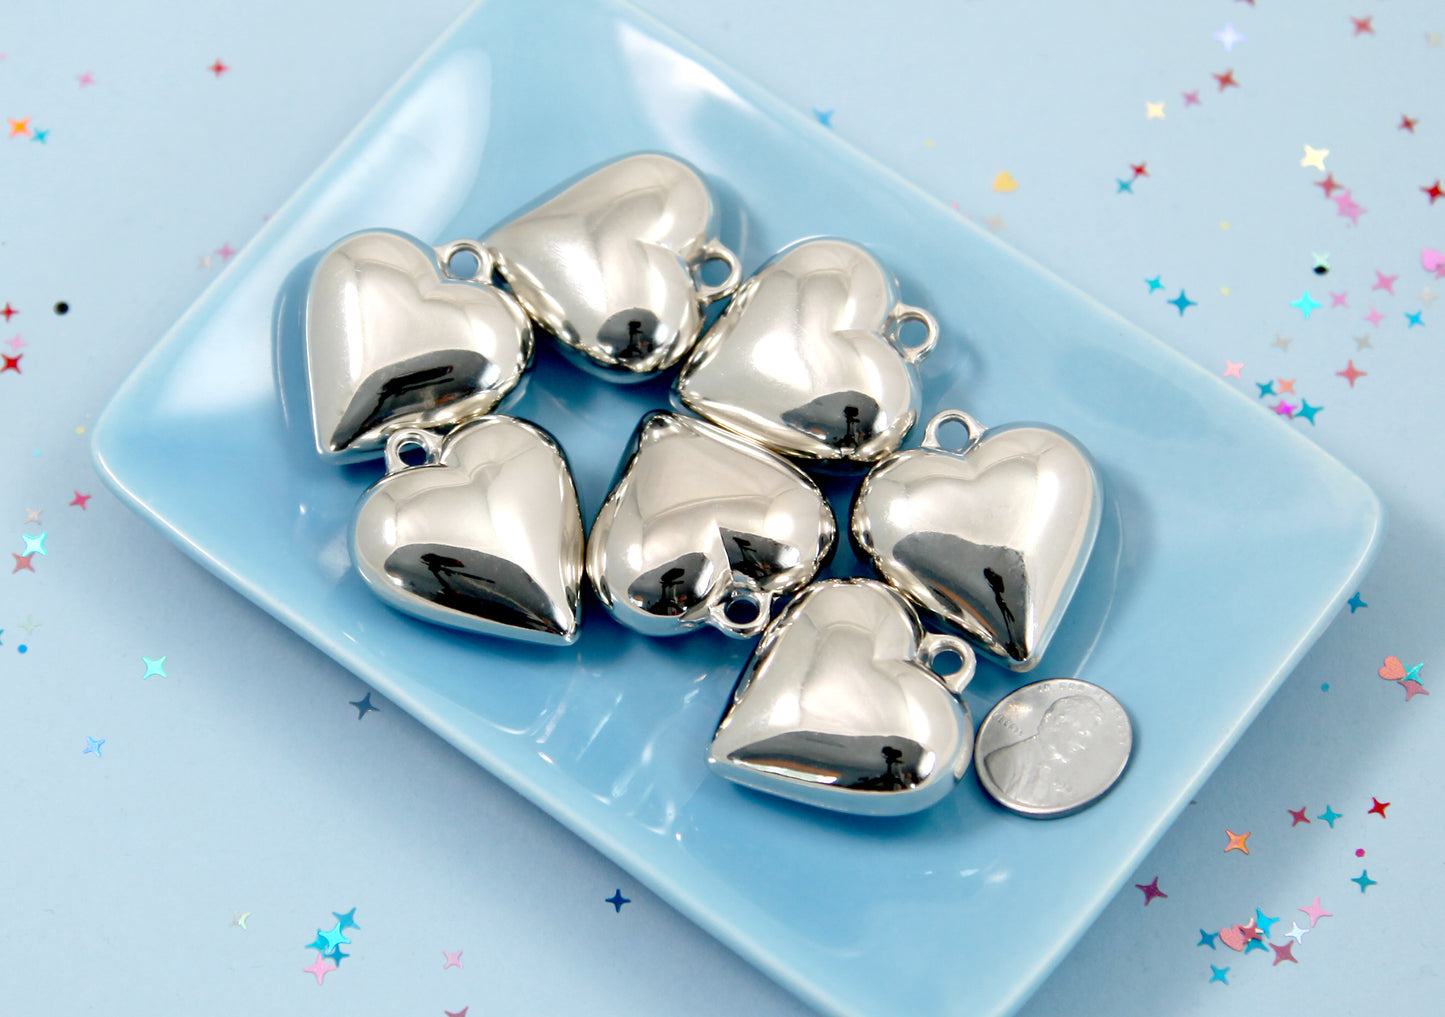 Big puffy heart pendant - Electroplated plastic 3D puffed heart - great for a choker necklace - 4 pc set